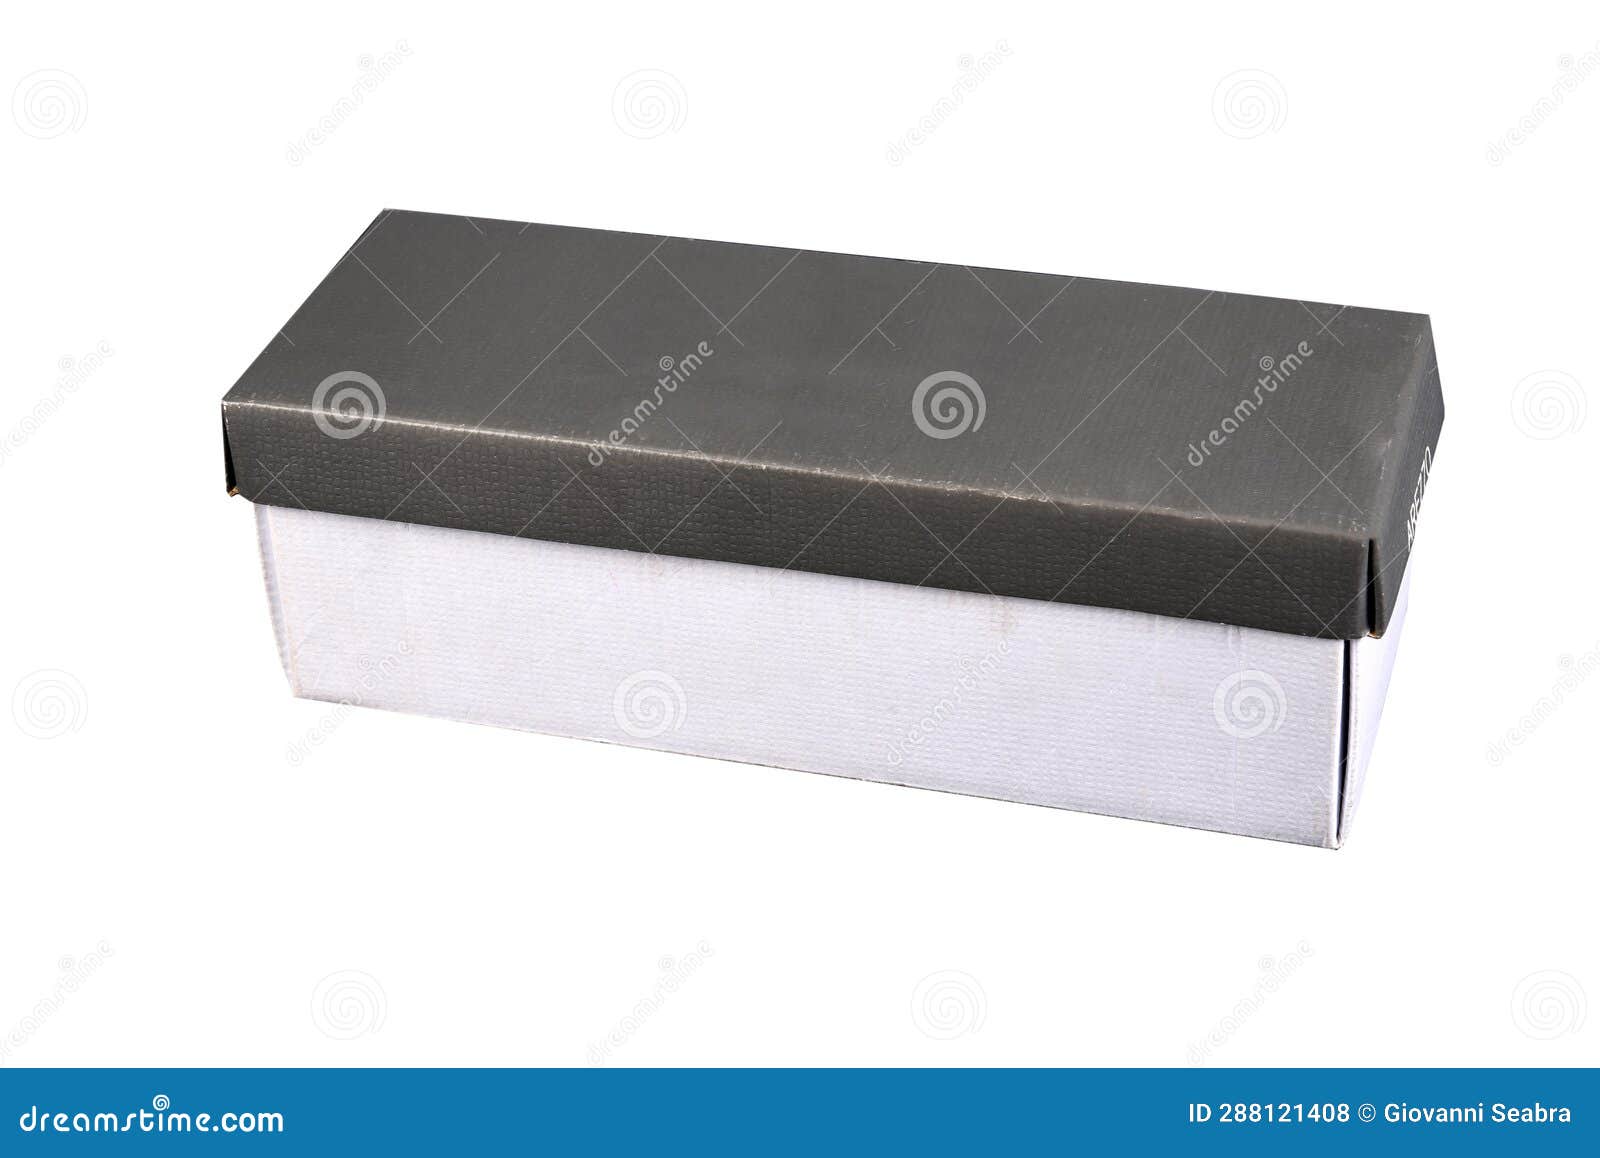 paper box for transport packaging and gift protection of product and gifts  on white background good for clipping